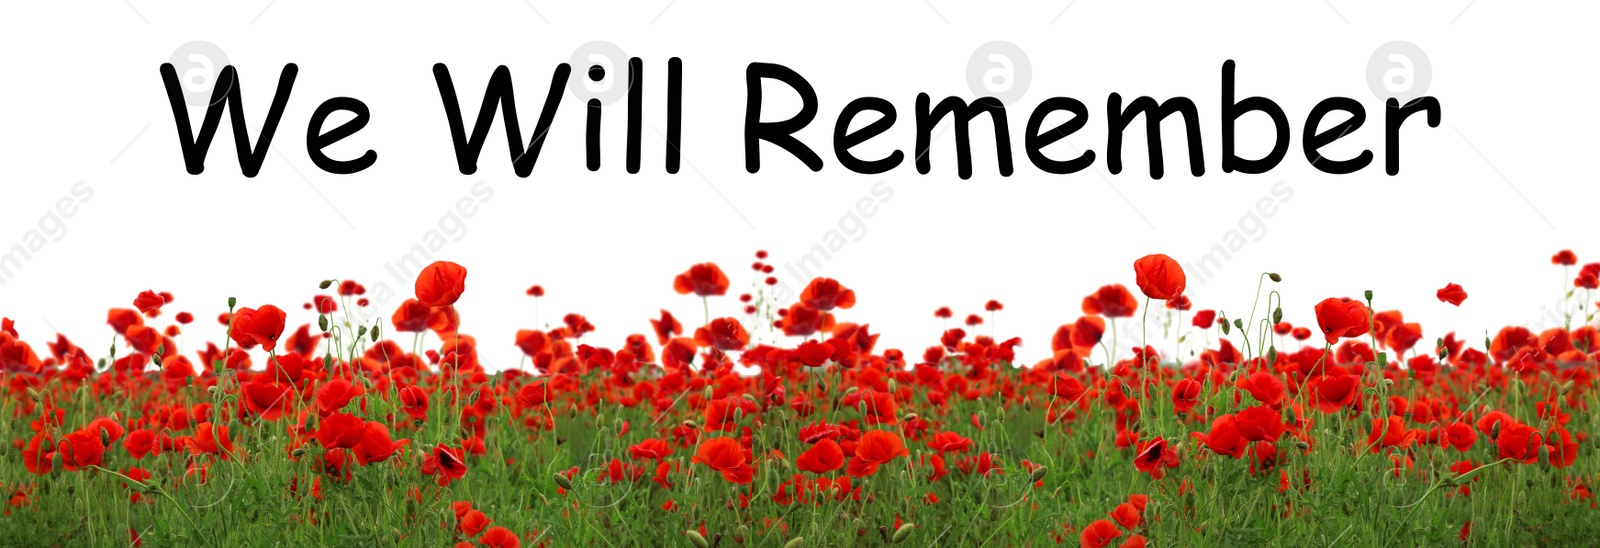 Image of Remembrance day banner. Red poppy flowers in field and text We will Remember on white background